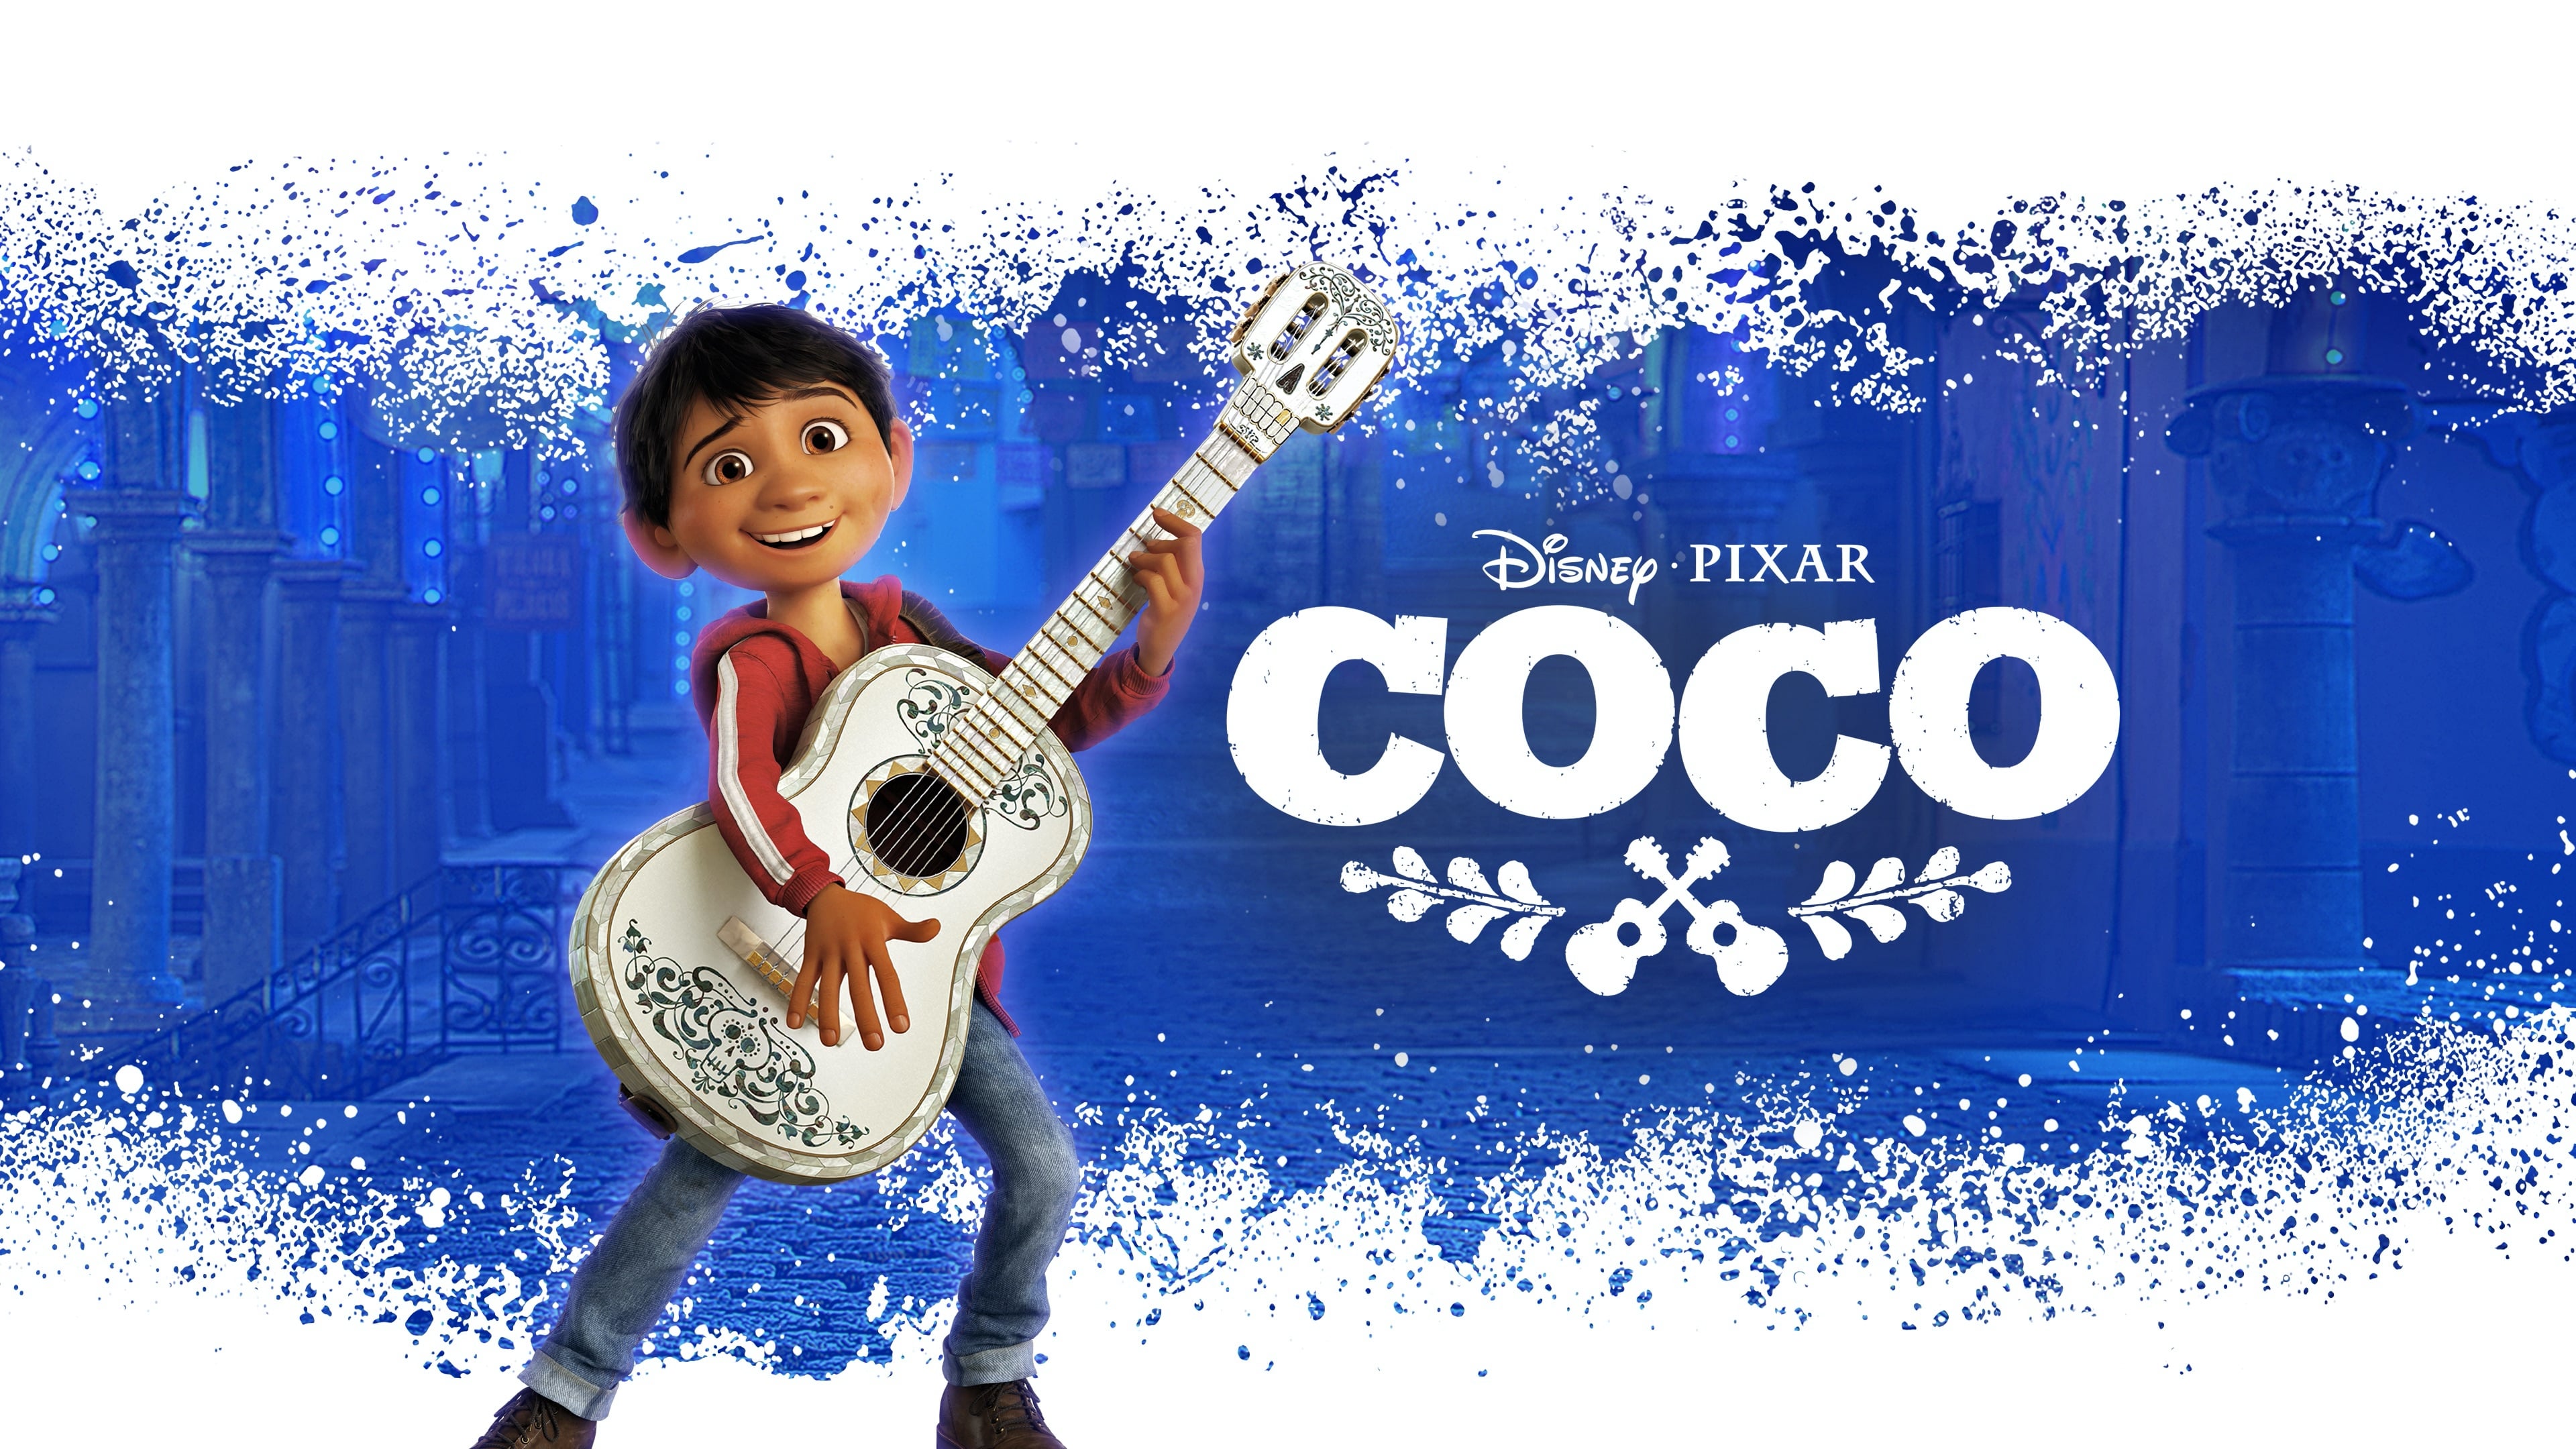 Watch Coco (2017) Full Movie Online Free | Stream Free Movies & TV Shows